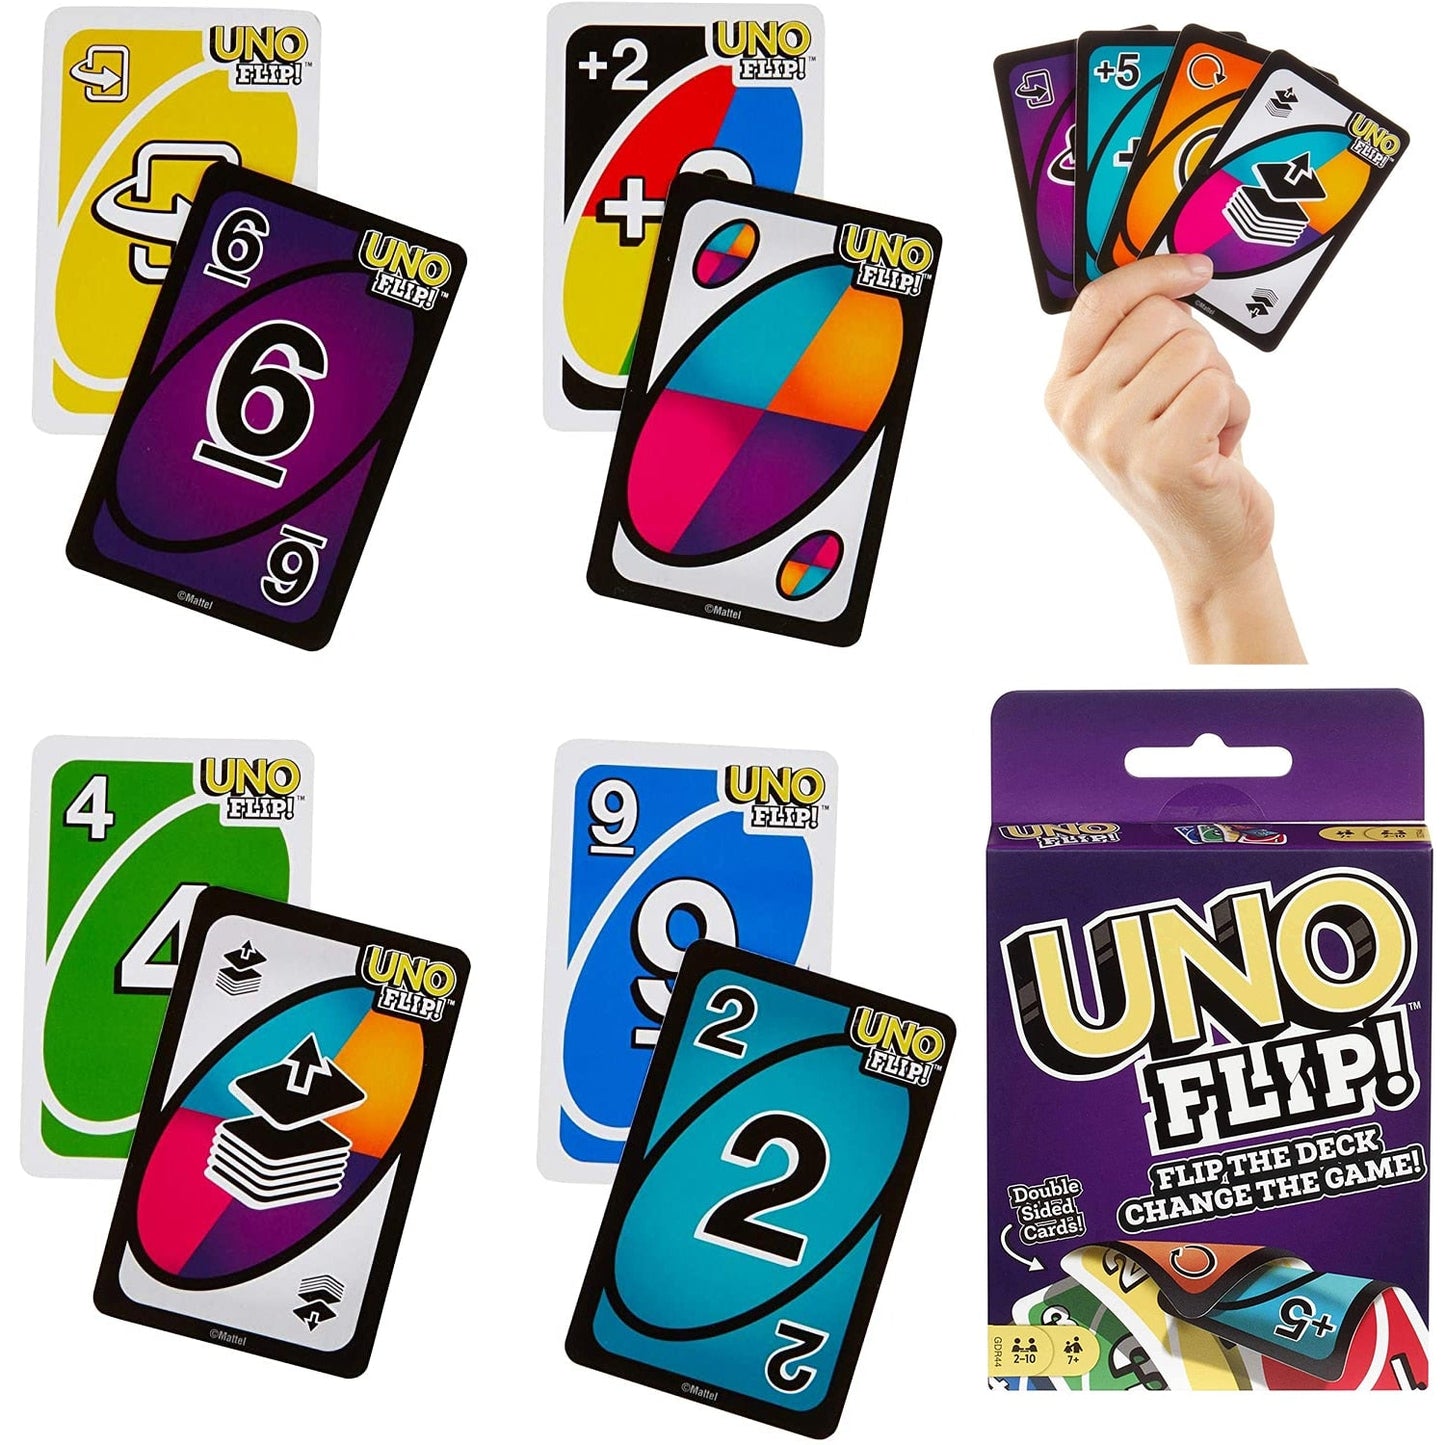 Buy UNO-FLIP Card Game Genuine Family Funny Entertainment Board Game Fun Playing Gift Box Uno flip Card - sams toy world shops in Ahmedabad - call on 9664998614 - best kids stores in Gujarat - Near me - discounted prices